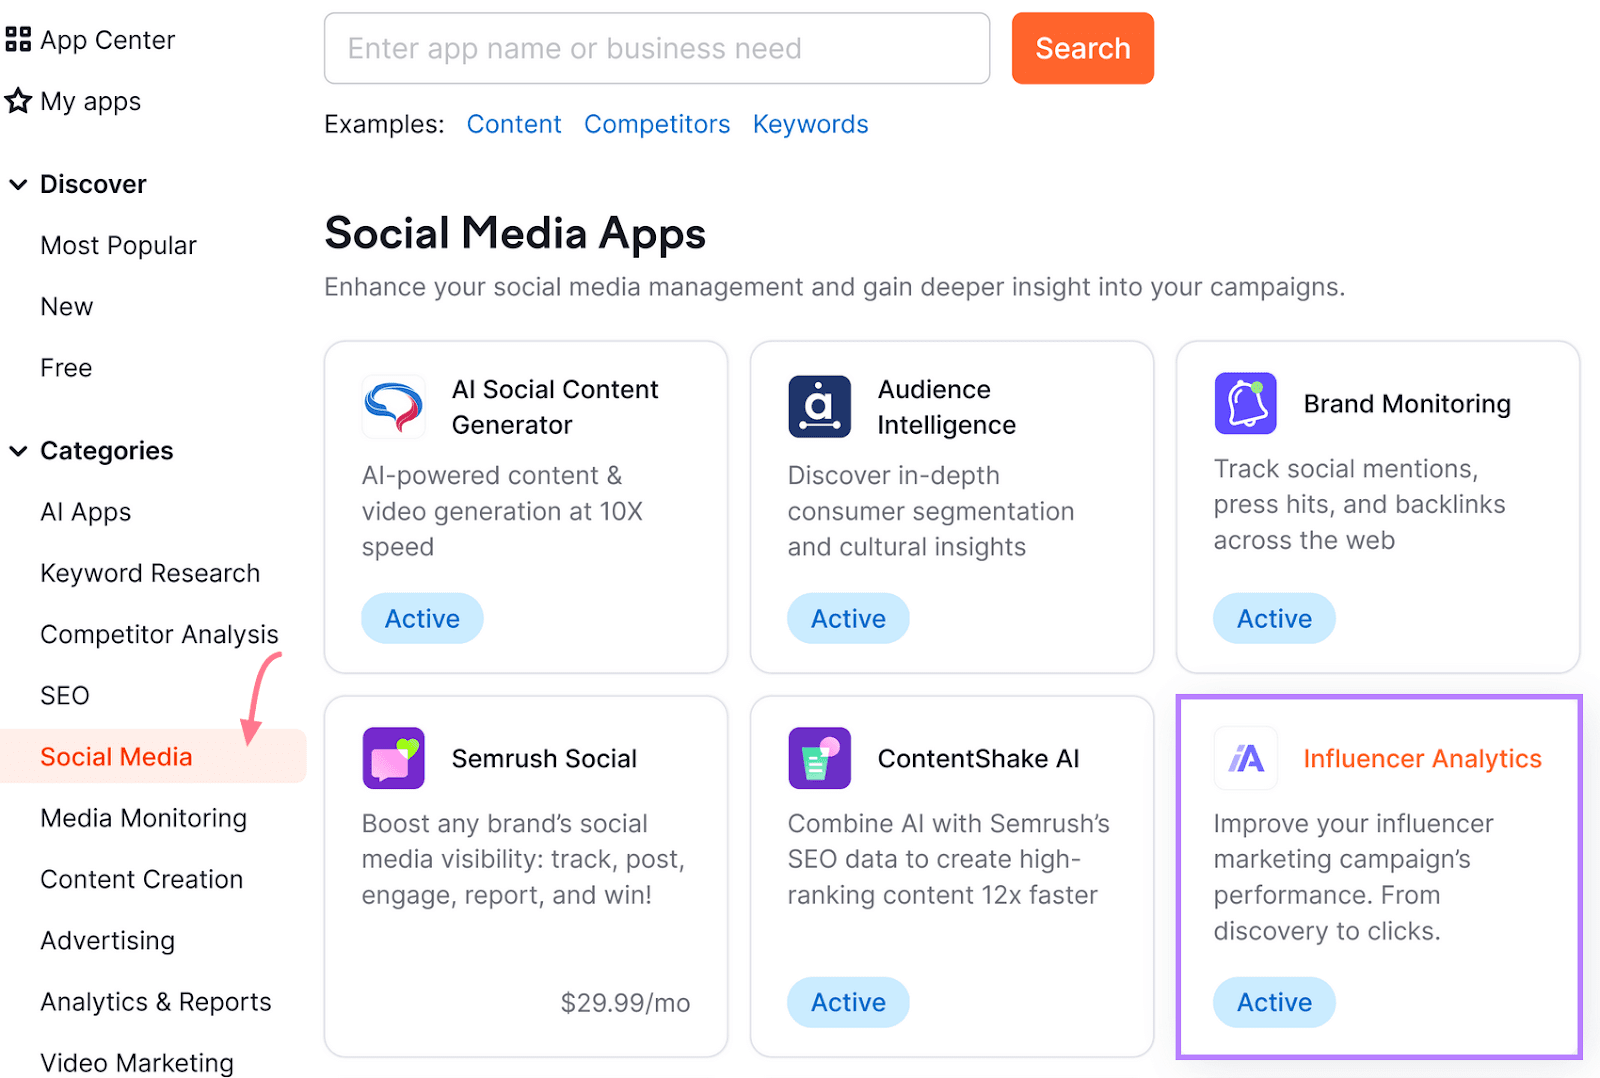 App tiles in Semrush's App Center, with "Influencer Analytics" highlighted with a purple box.